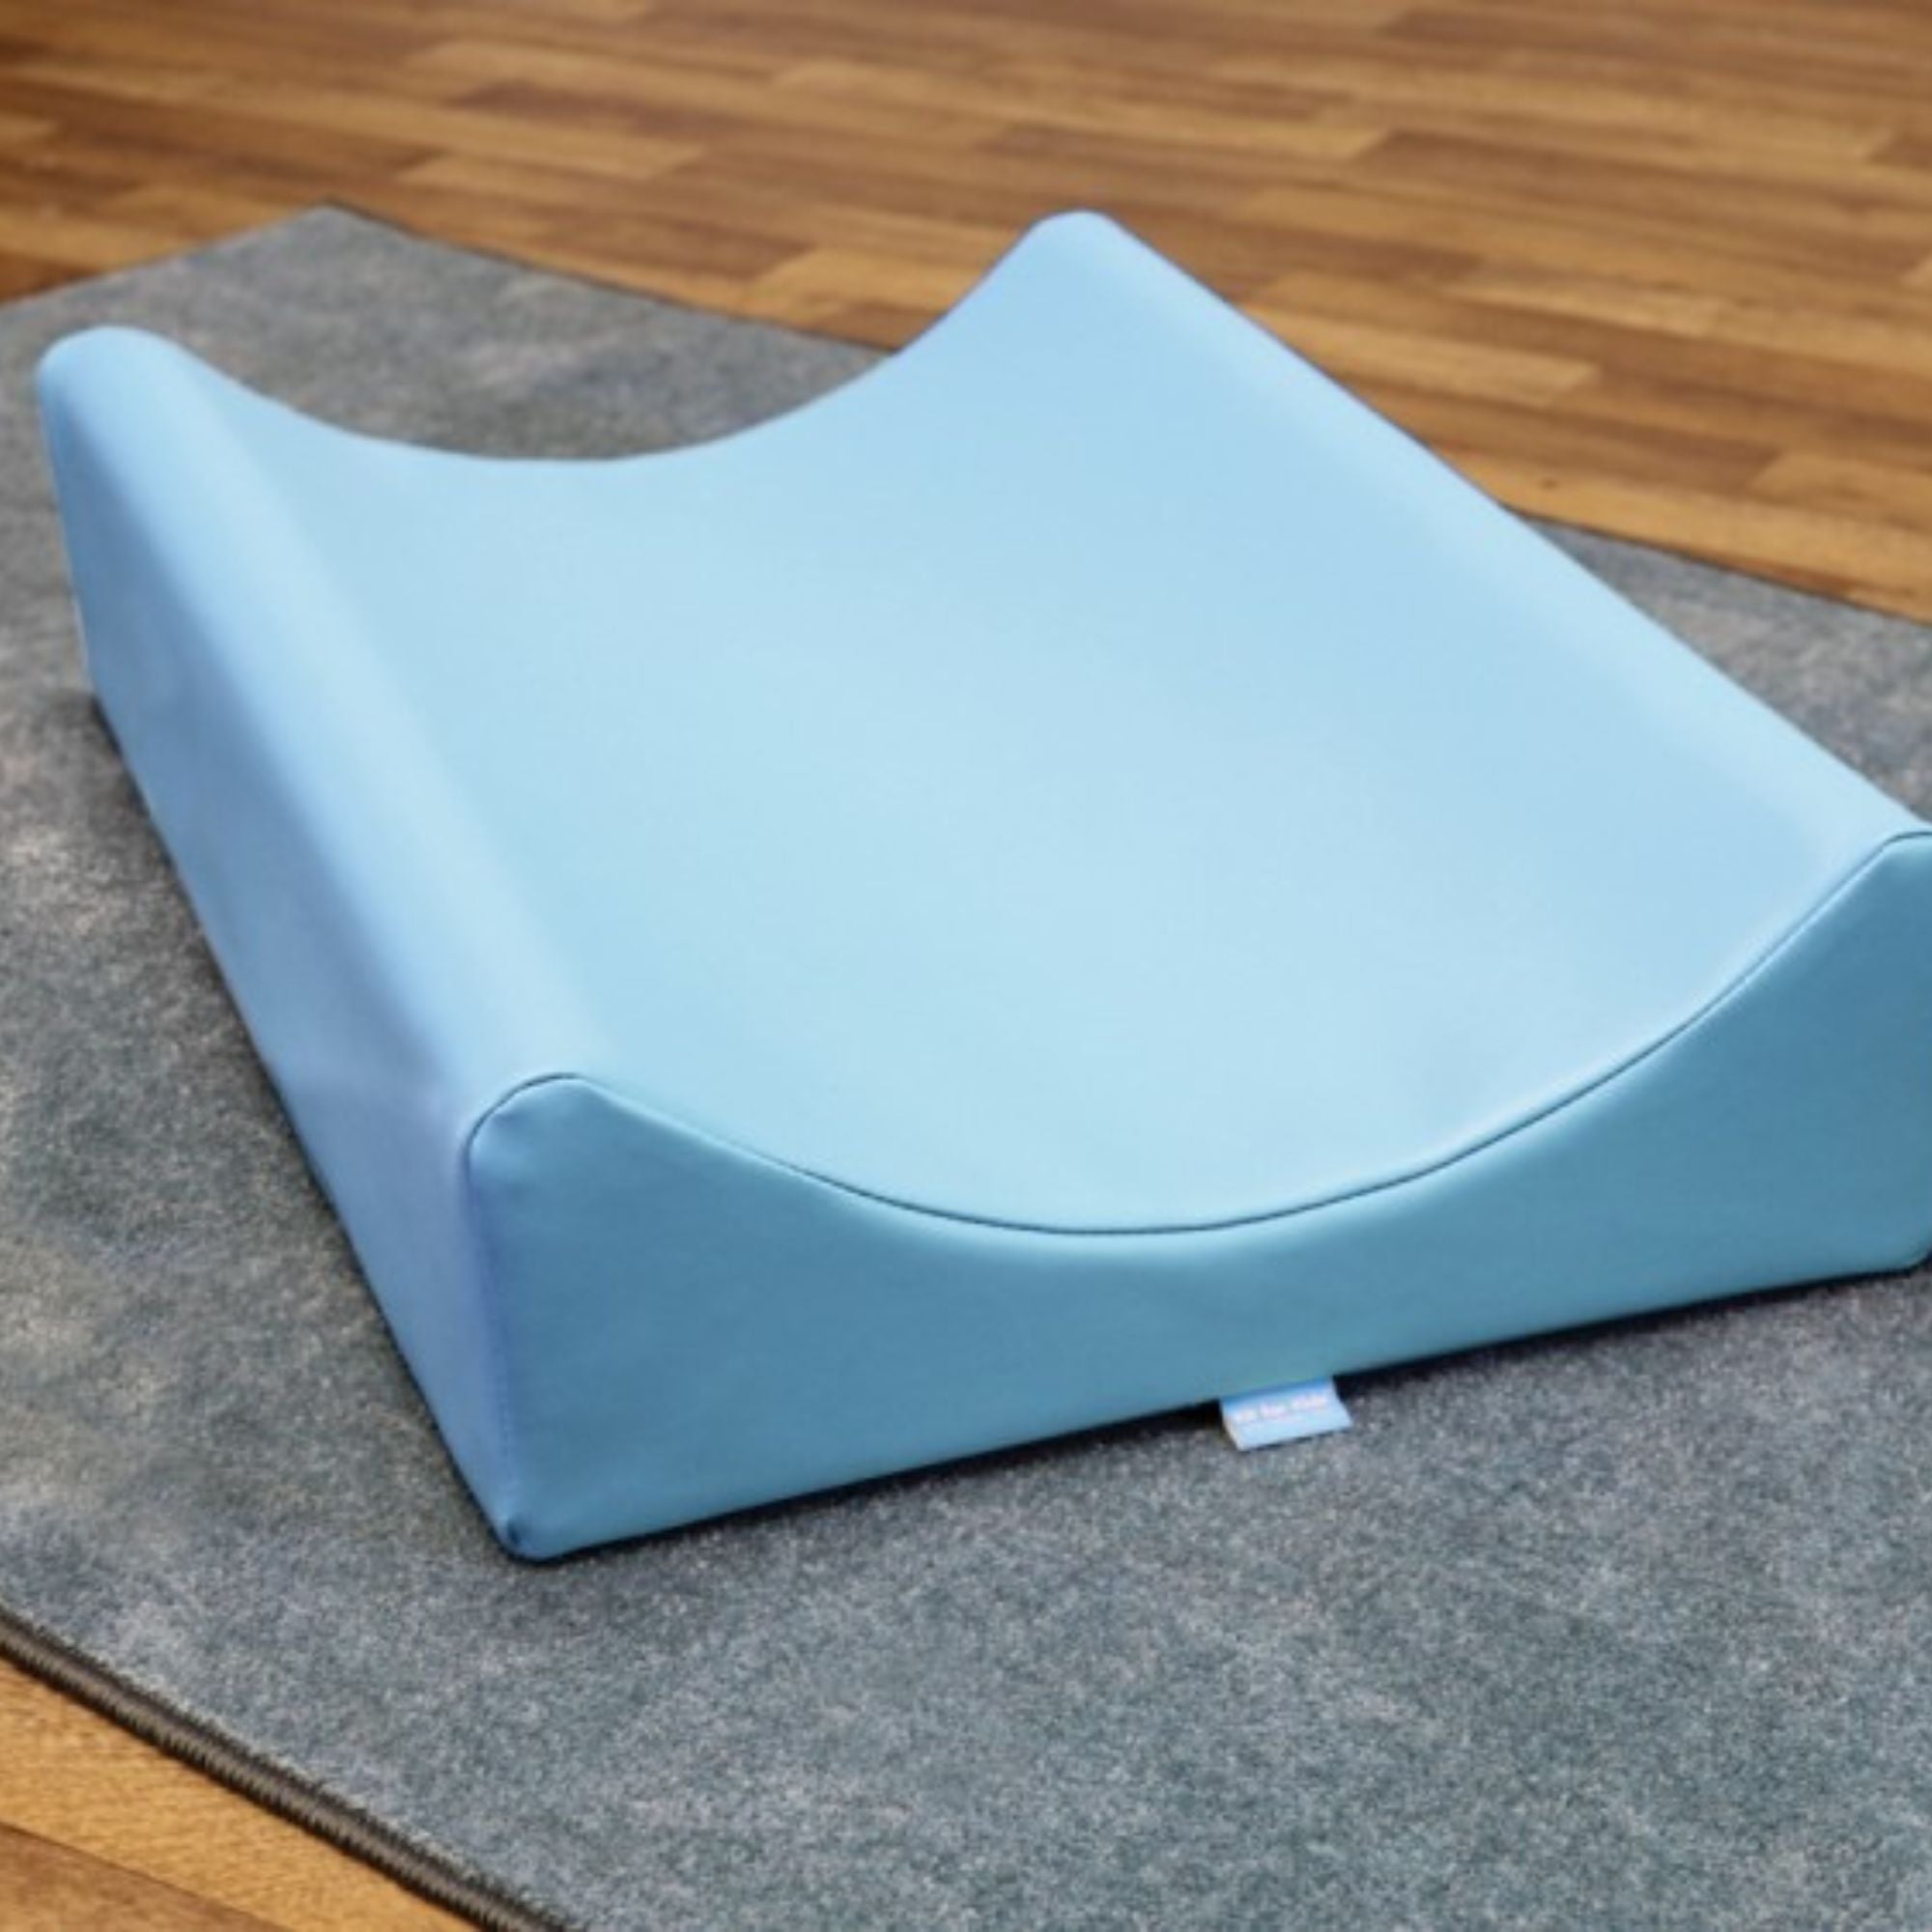 Snoozeland™ Changing Mat Light Blue Pack of 3, The Snoozeland™ Changing Mat Light Blue is our toughest professional changing mat for use on its own or on changing tables or units. The Snoozeland™ Changing Mat Light Blue has a deep profiled foam design forms a concave surface to gently hold active and larger babies without restricting access The Snoozeland™ Changing Mat has a Wipe-clean surface designed for constant cleaning The Snoozeland™ Changing Mat comes as a set of 3 changing mats. Our toughest profess